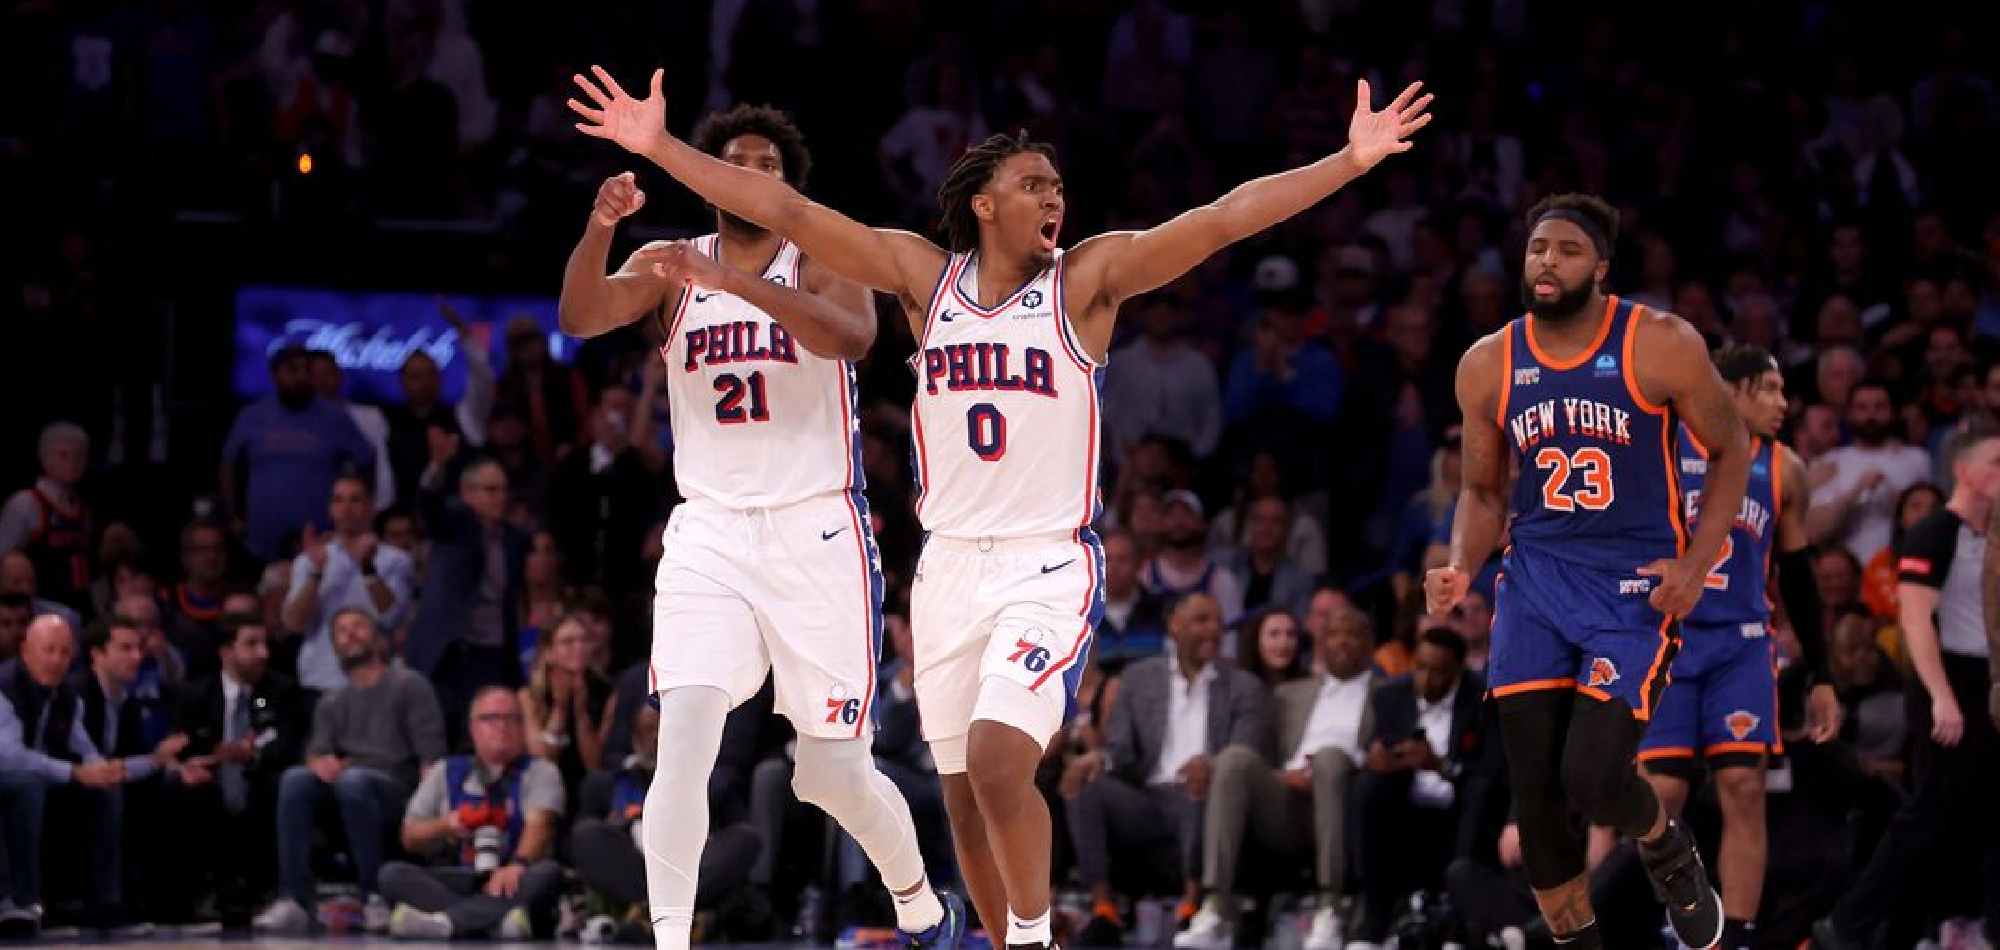 NBA Playoffs: 76ers fend off Knicks in OT, forces a game 6